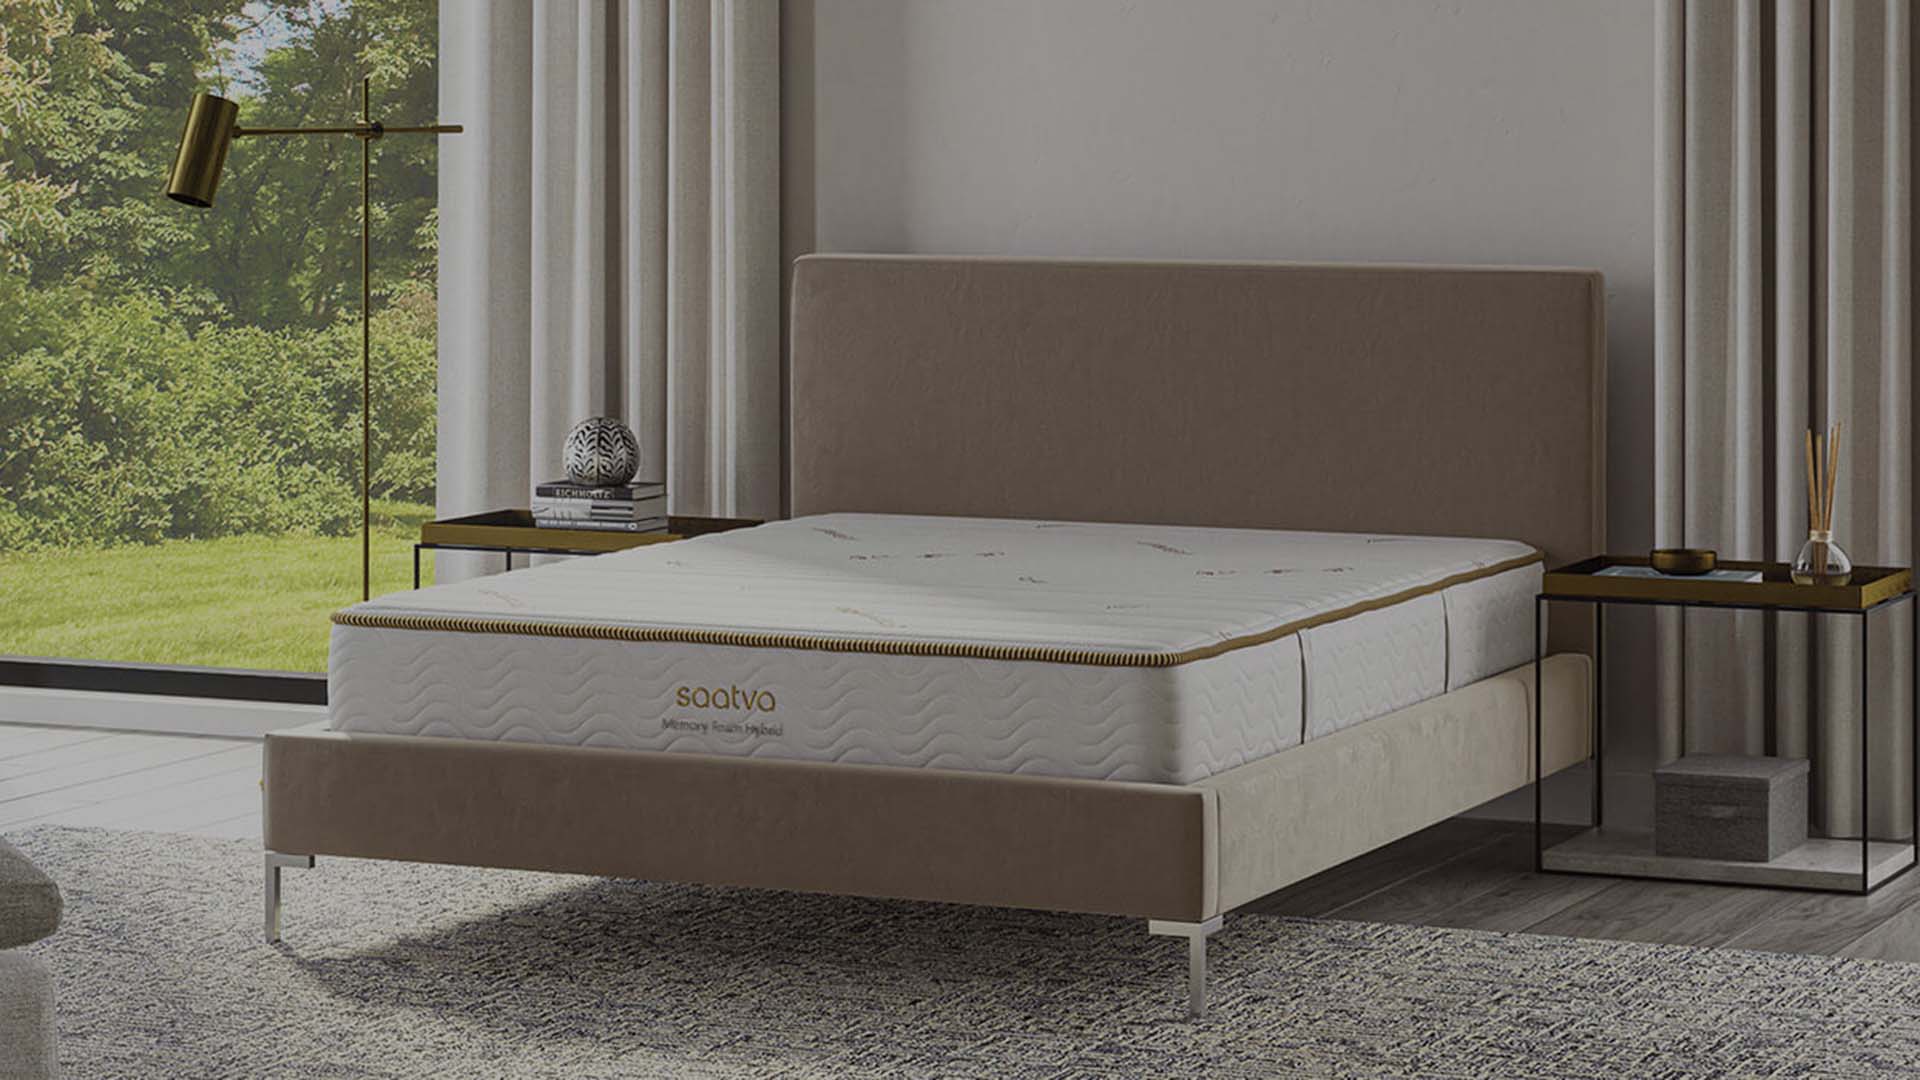 Who sells Saatva mattresses near me in Knoxville, TN